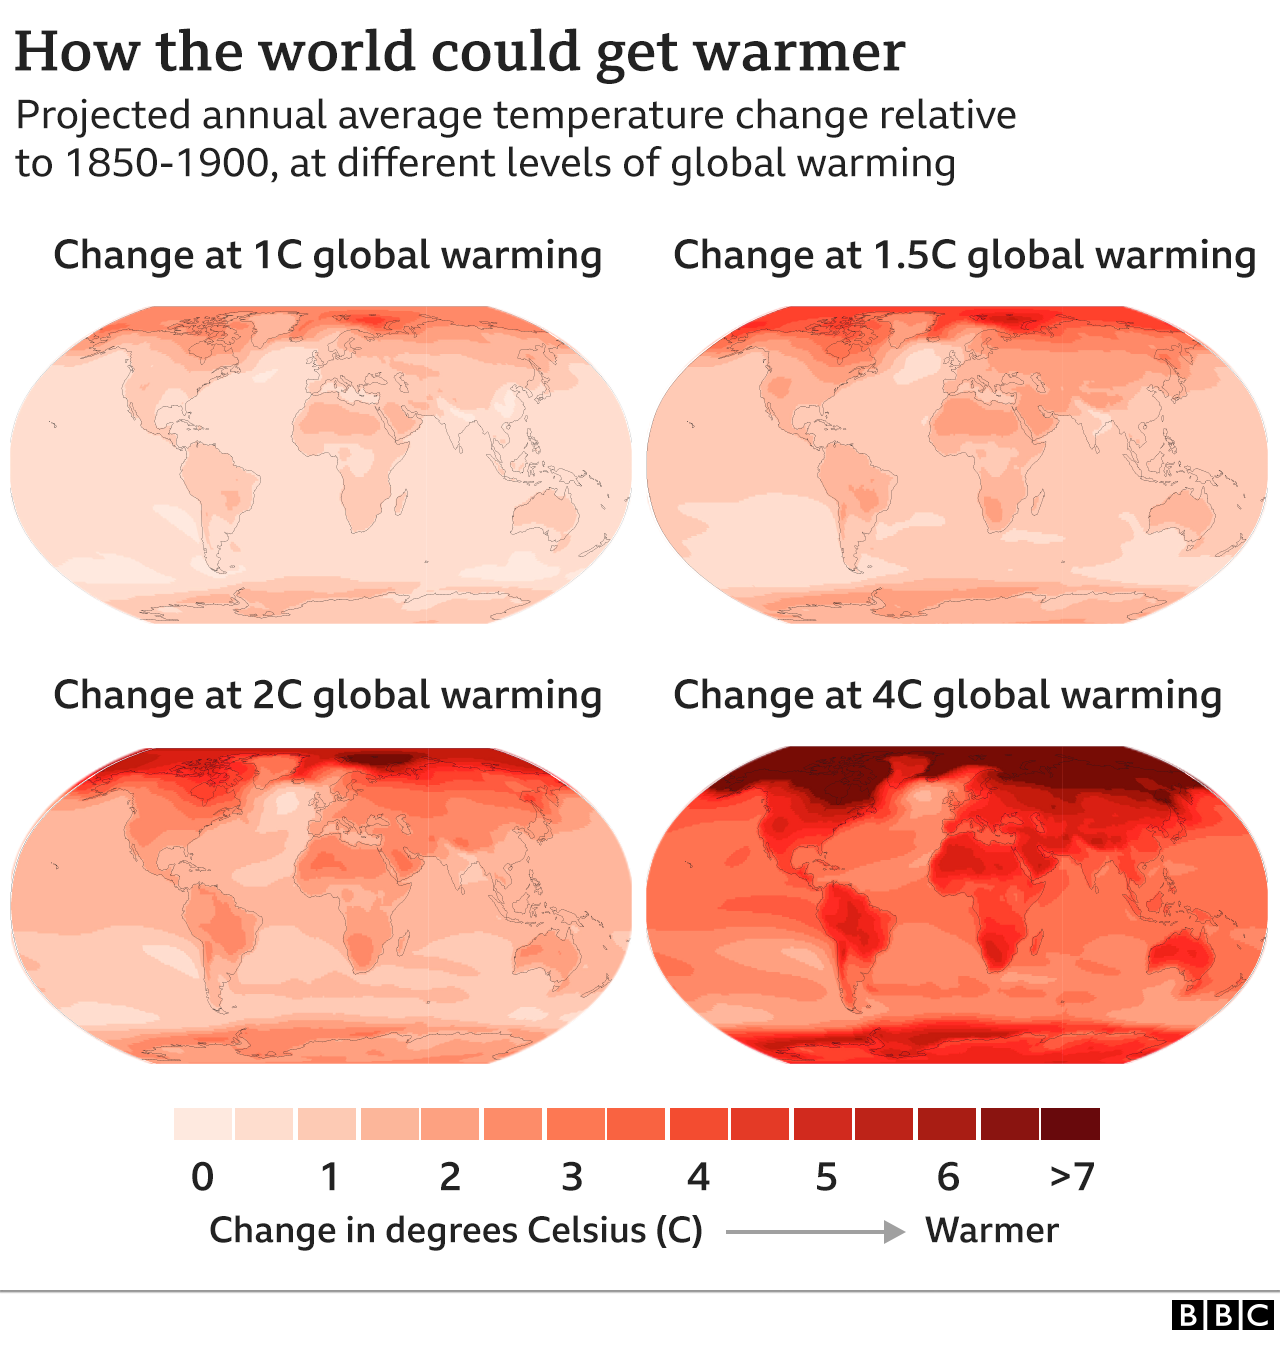 Infographic showing how different parts of the world will warm at 1C, 1.5C, 2C and 4C of warming. The Arctic and high mountain areas warm much more than the global average.